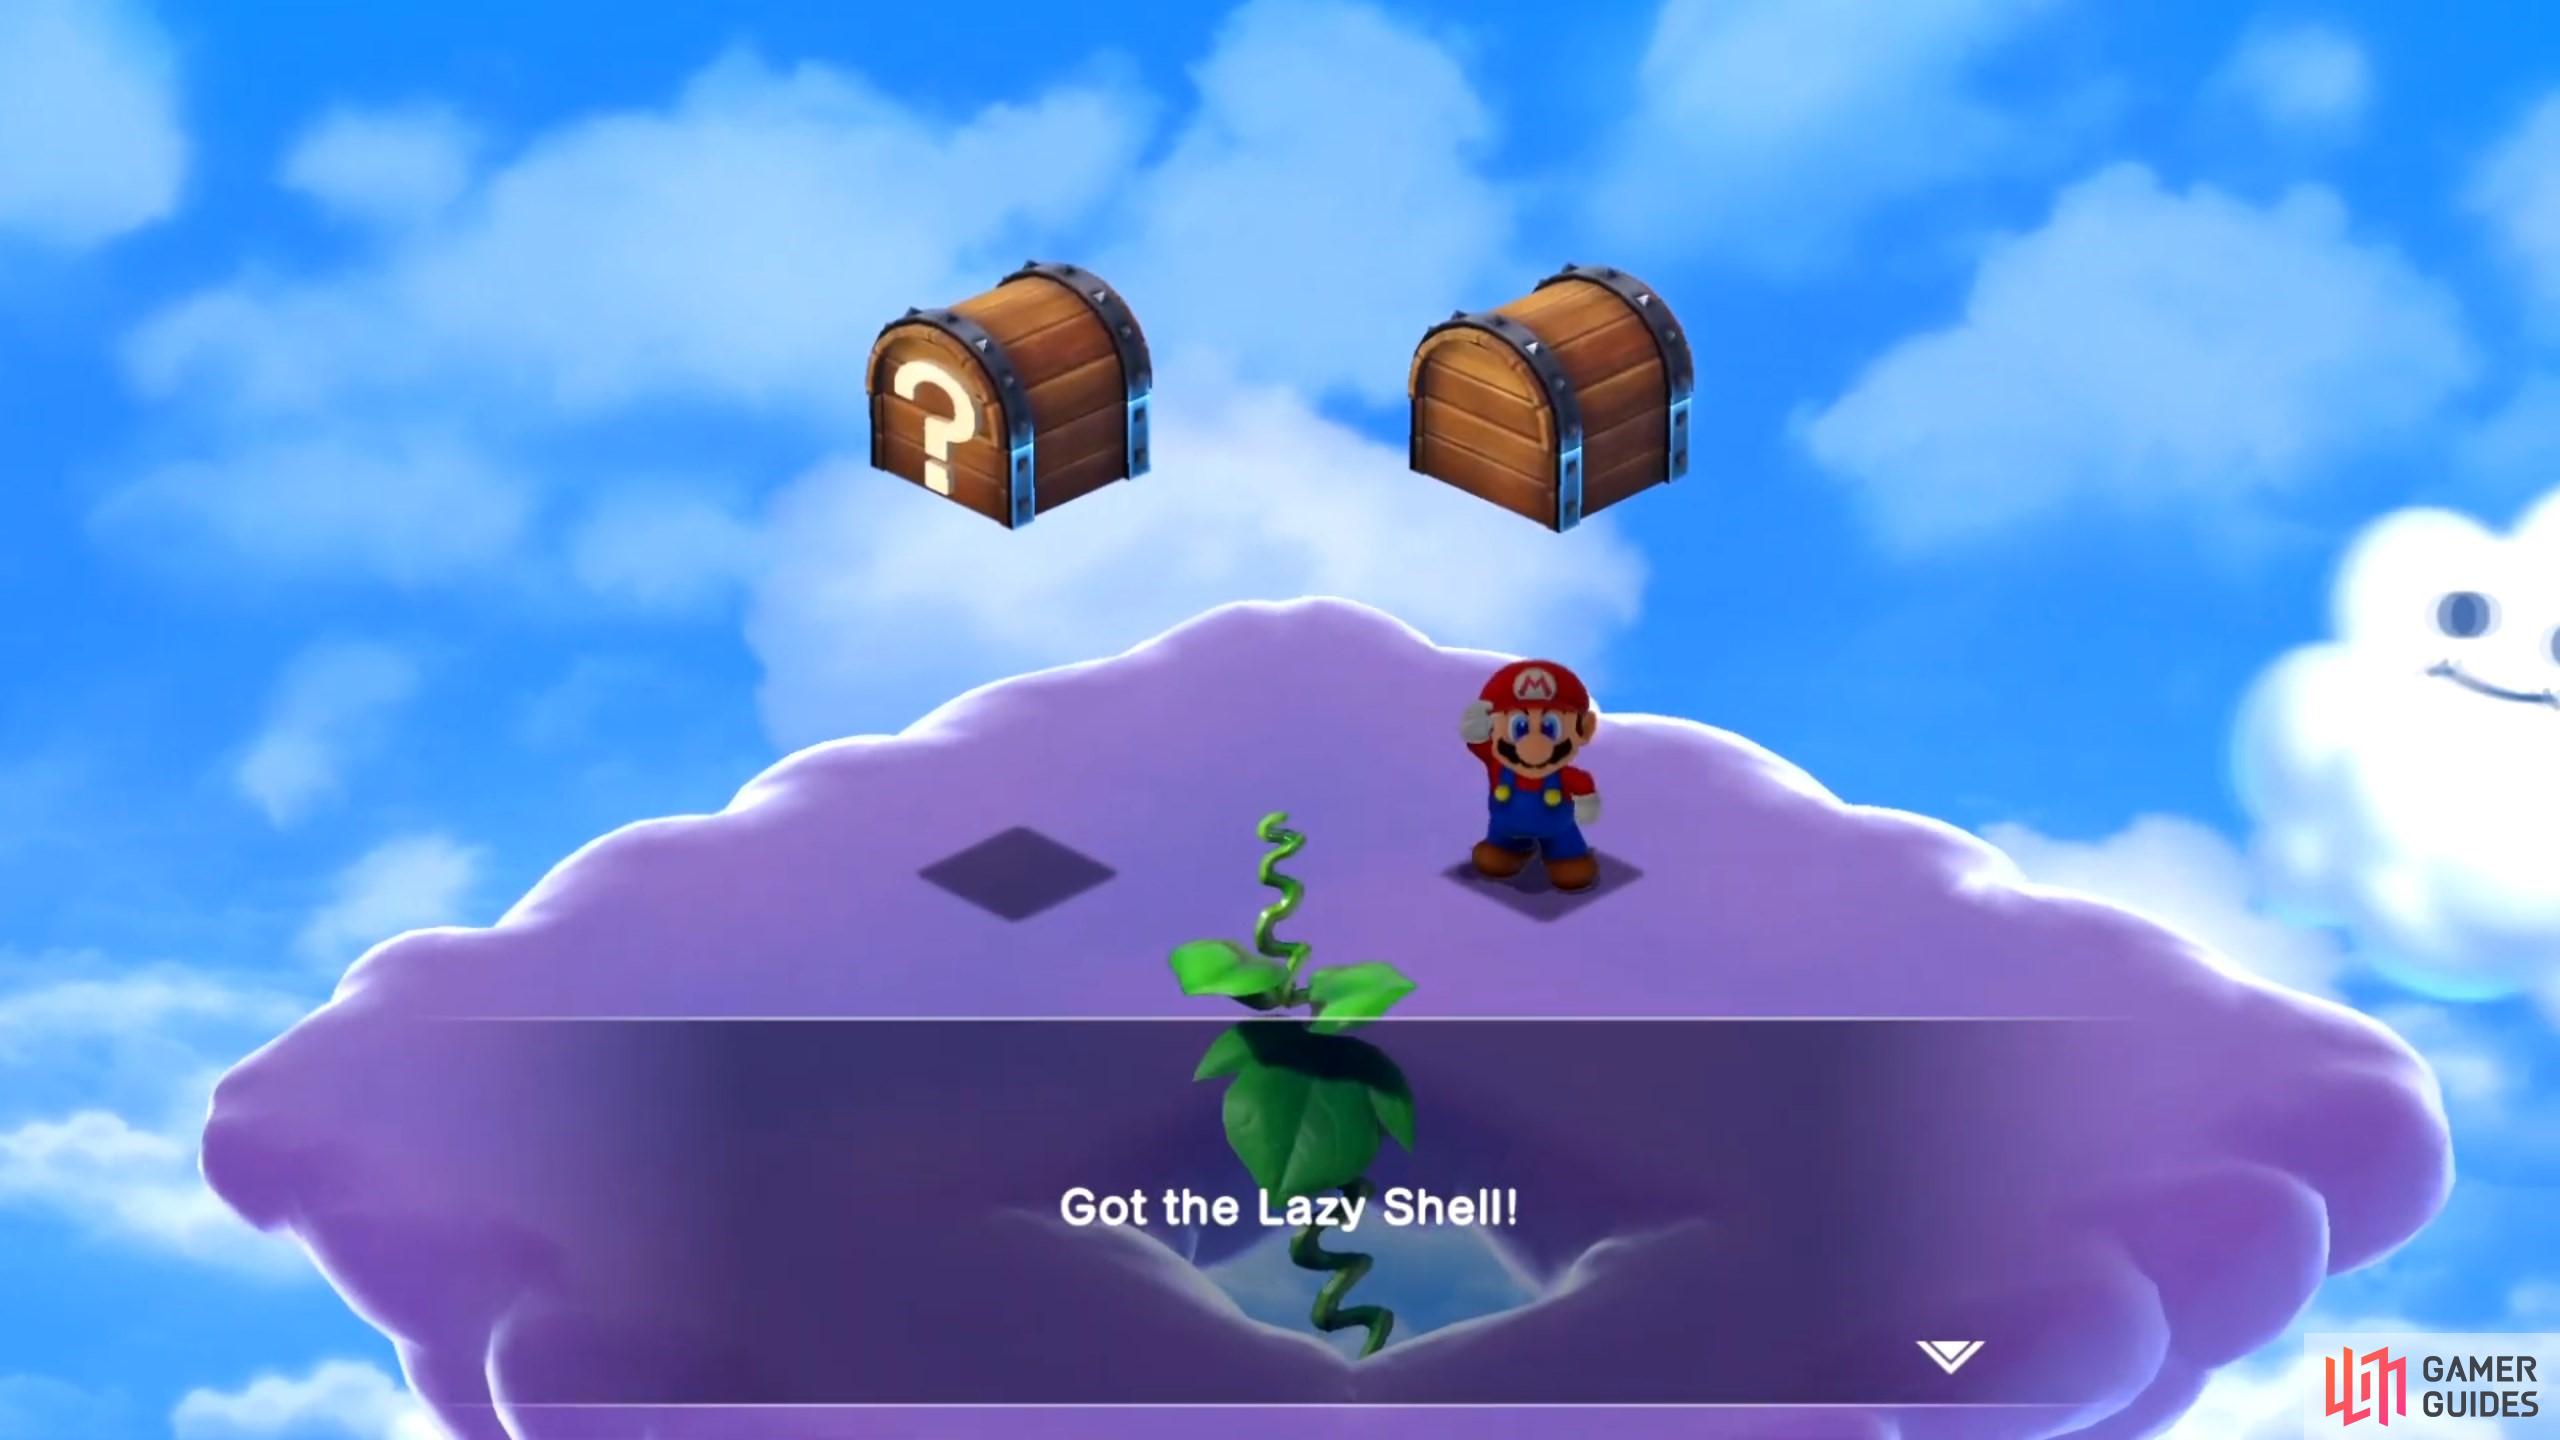 The Lazy Shell is the ultimate weapon for Mario! Read on to find out how to find it!